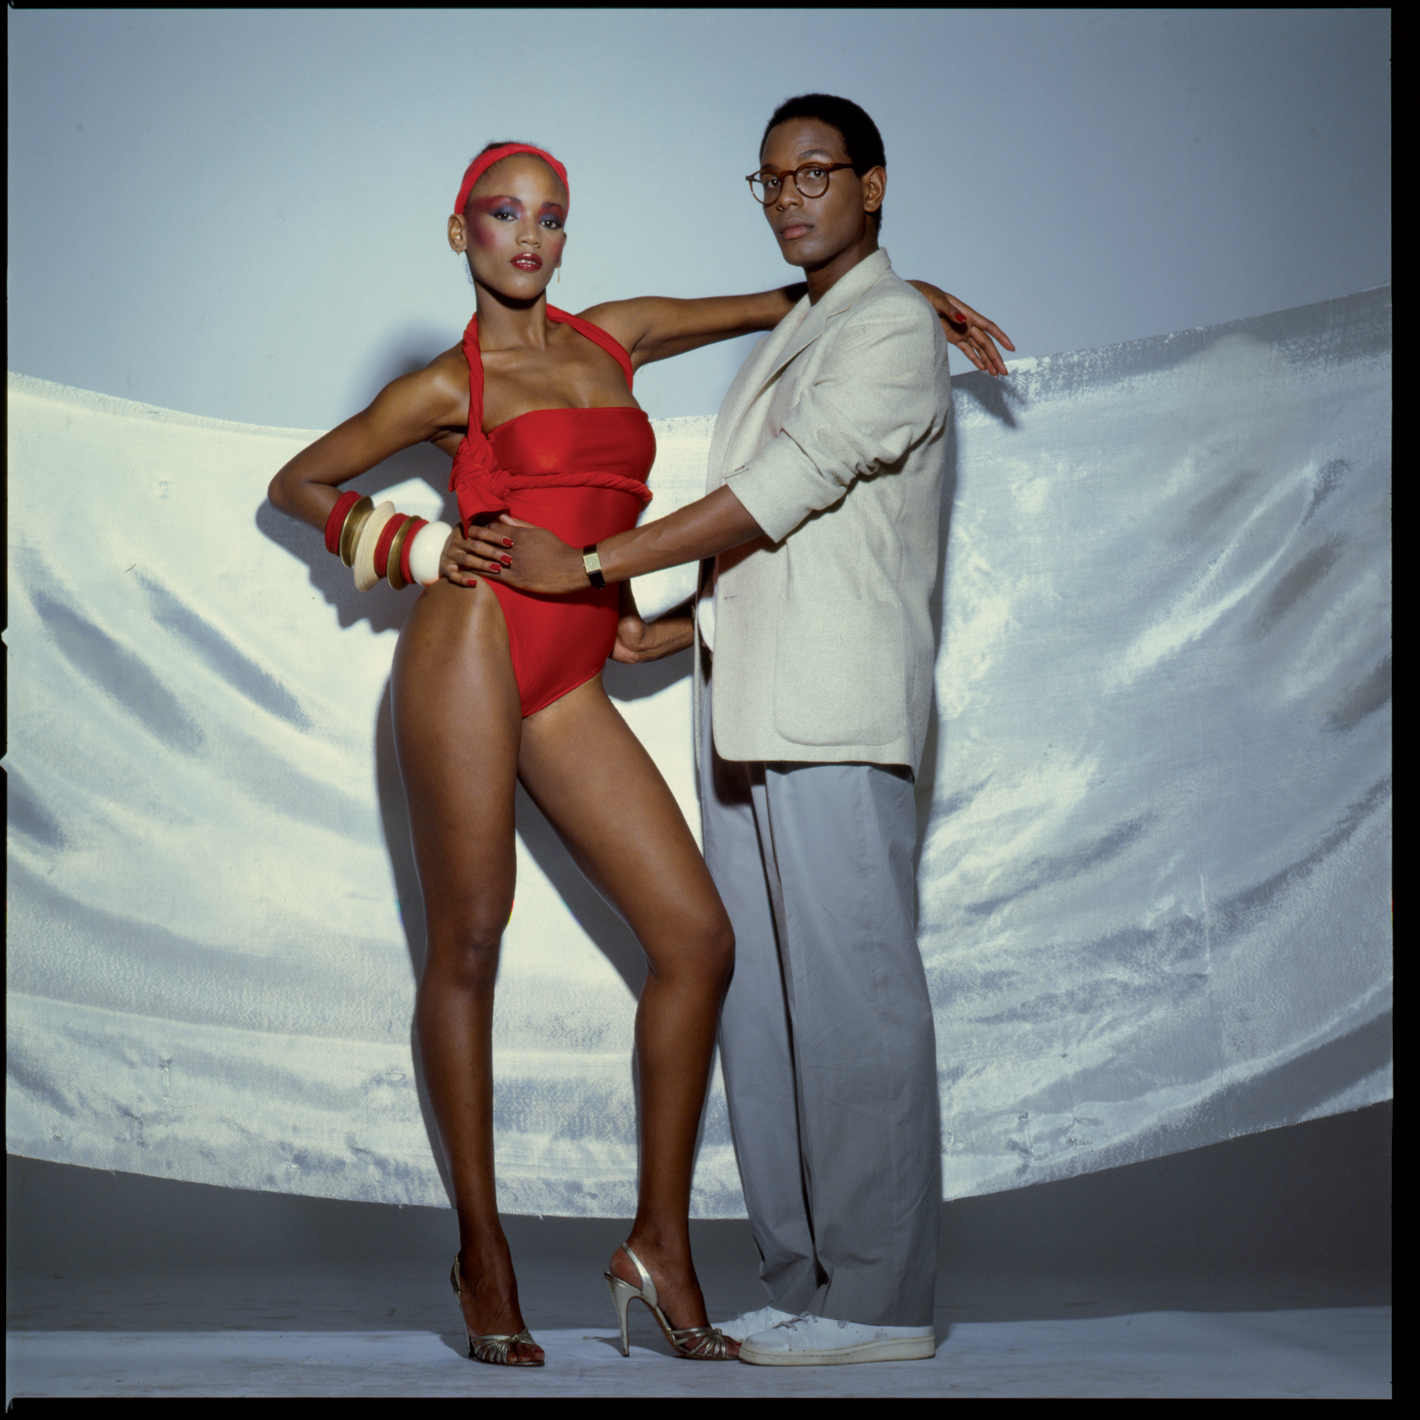 A man in glasses, a white jacket, in grey pants holds the torso of a woman dressed in a red bathing suit, wearing a number of bracelets on her wrist and a red bandana while in silver heels against a shimmery background